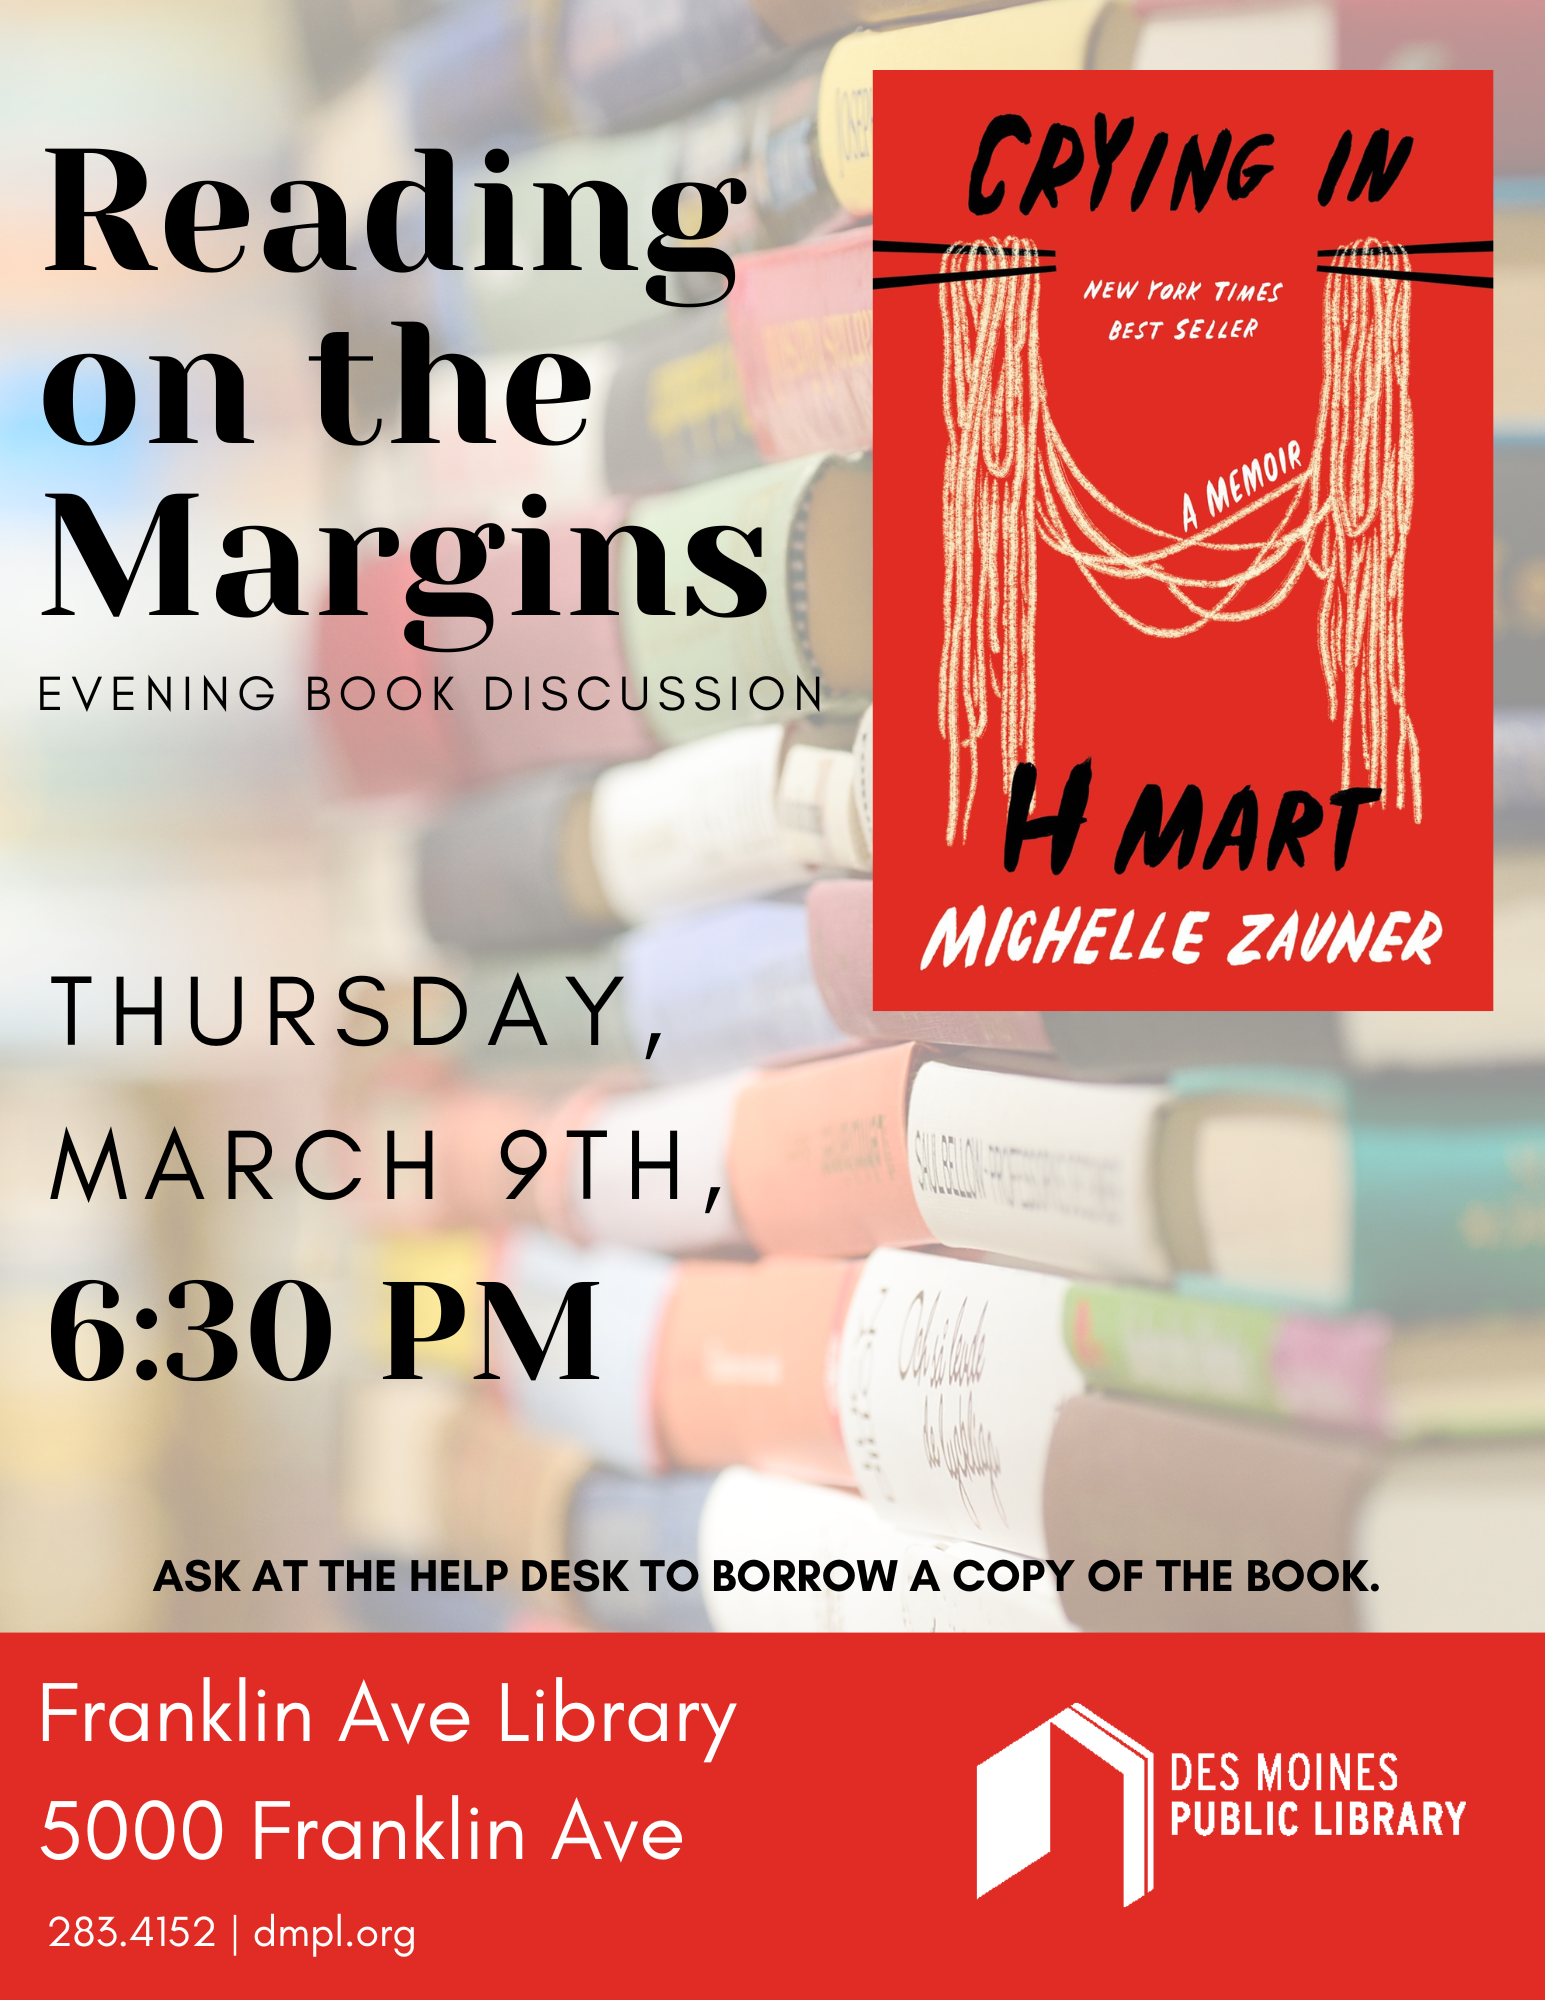 An image of the promotional poster for Reading on the Margins.